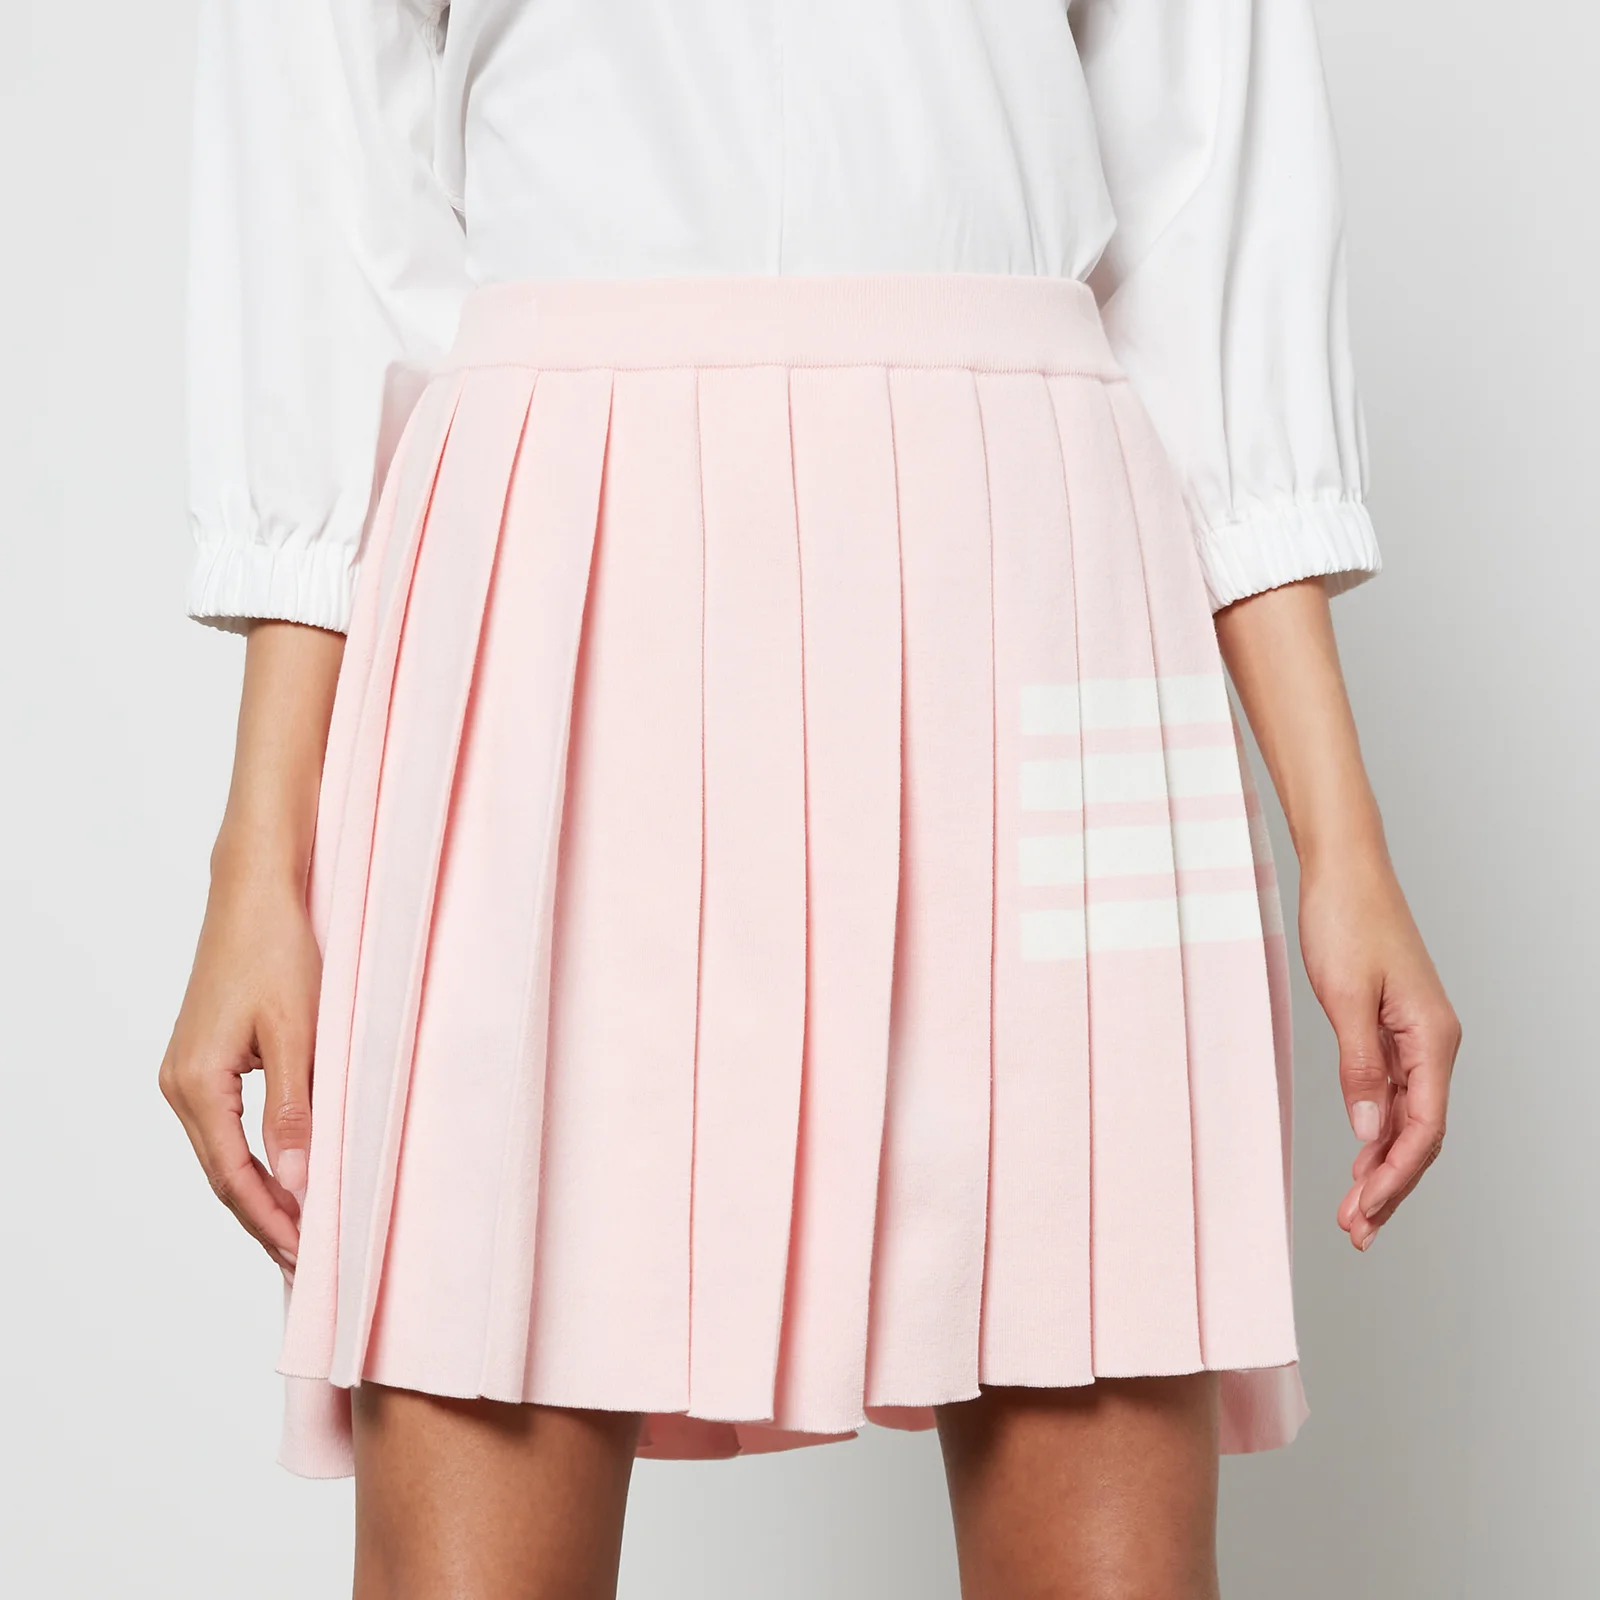 Thom Browne Women's Mini Dropped Back Pleated Skirt - Light Pink Image 1